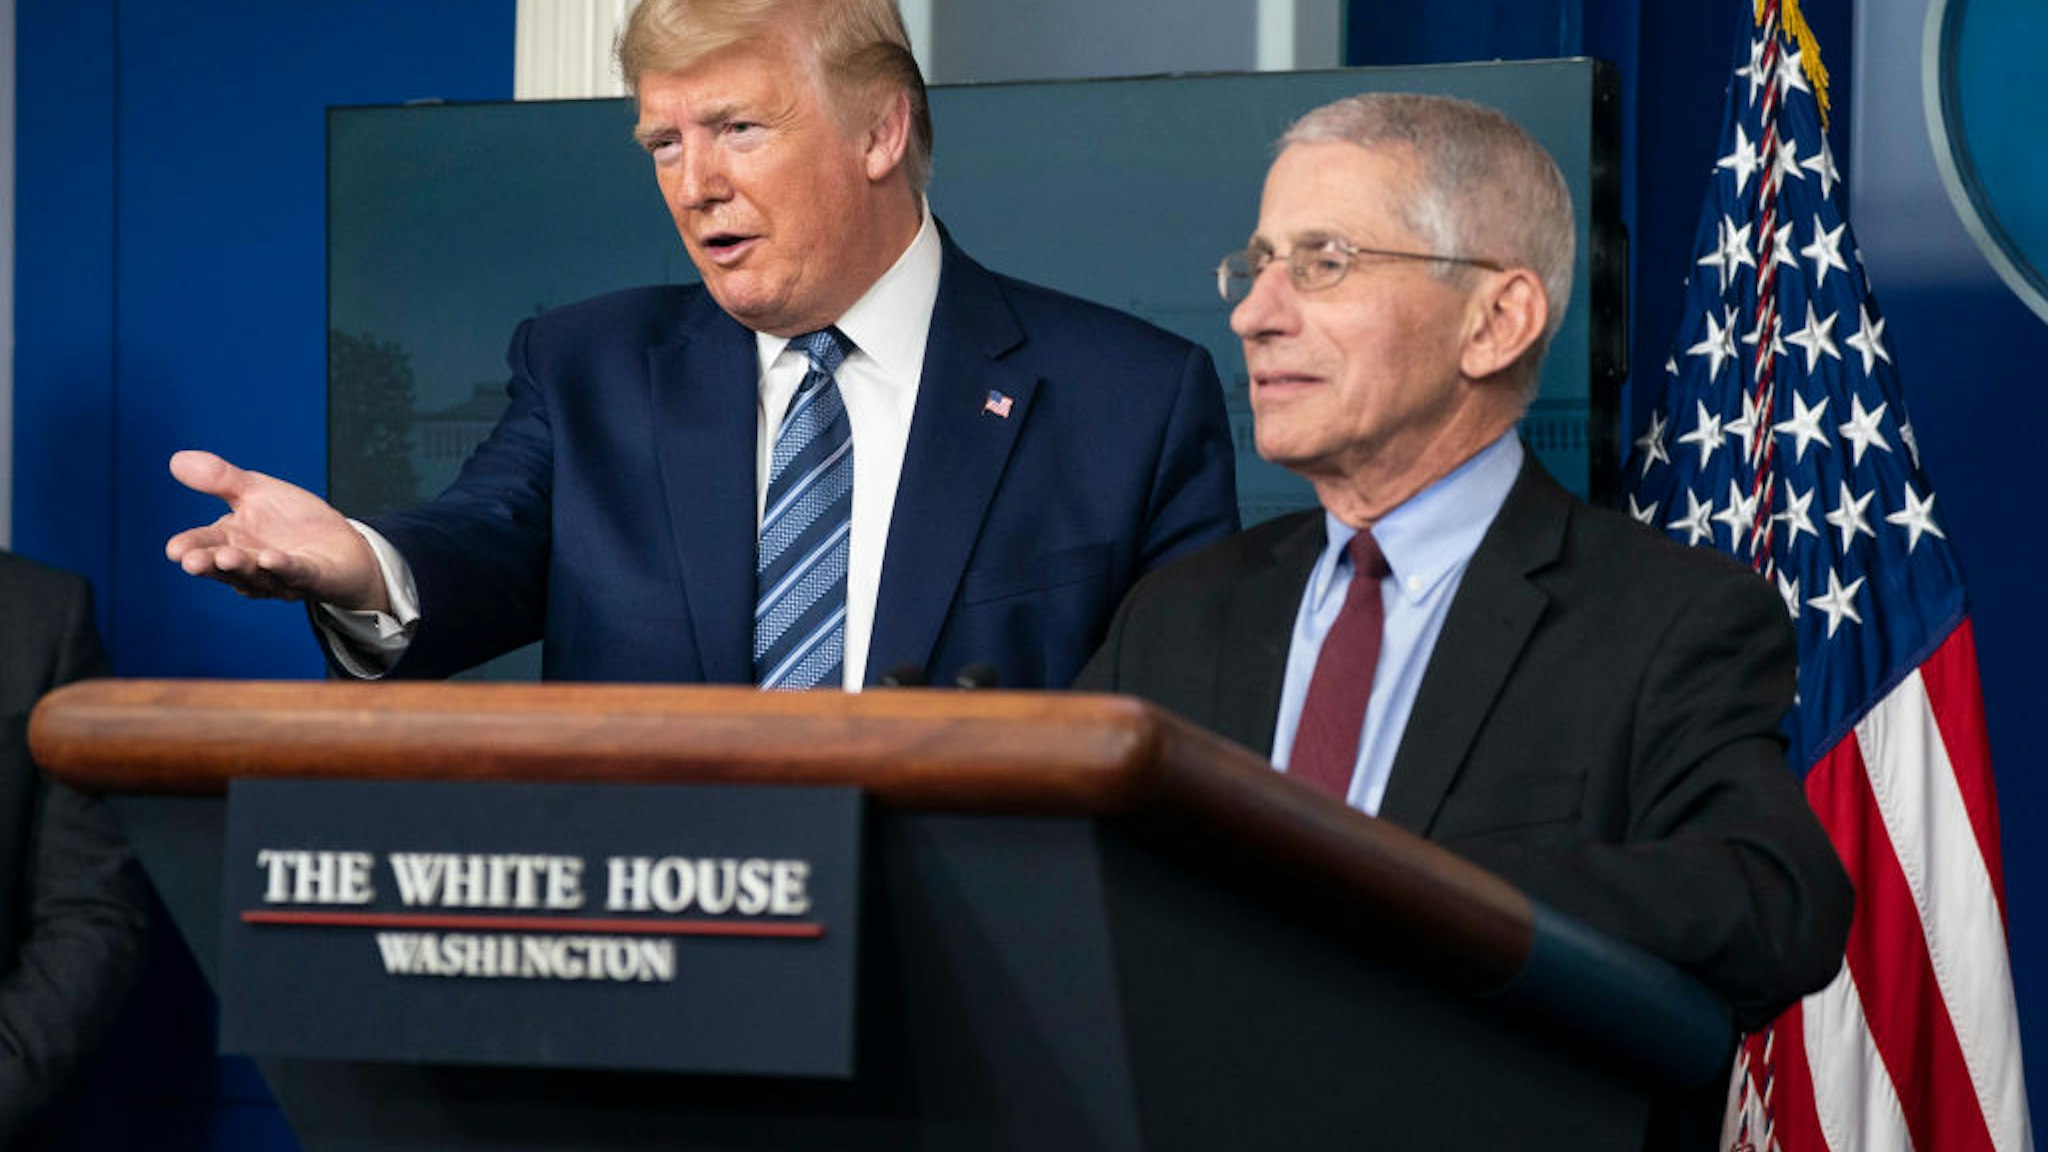 U.S. President Donald Trump and Anthony Fauci, director of the National Institute of Allergy and Infectious Diseases, hold a press briefing with members of the White House Coronavirus Task Force on April 5, 2020 in Washington, DC.